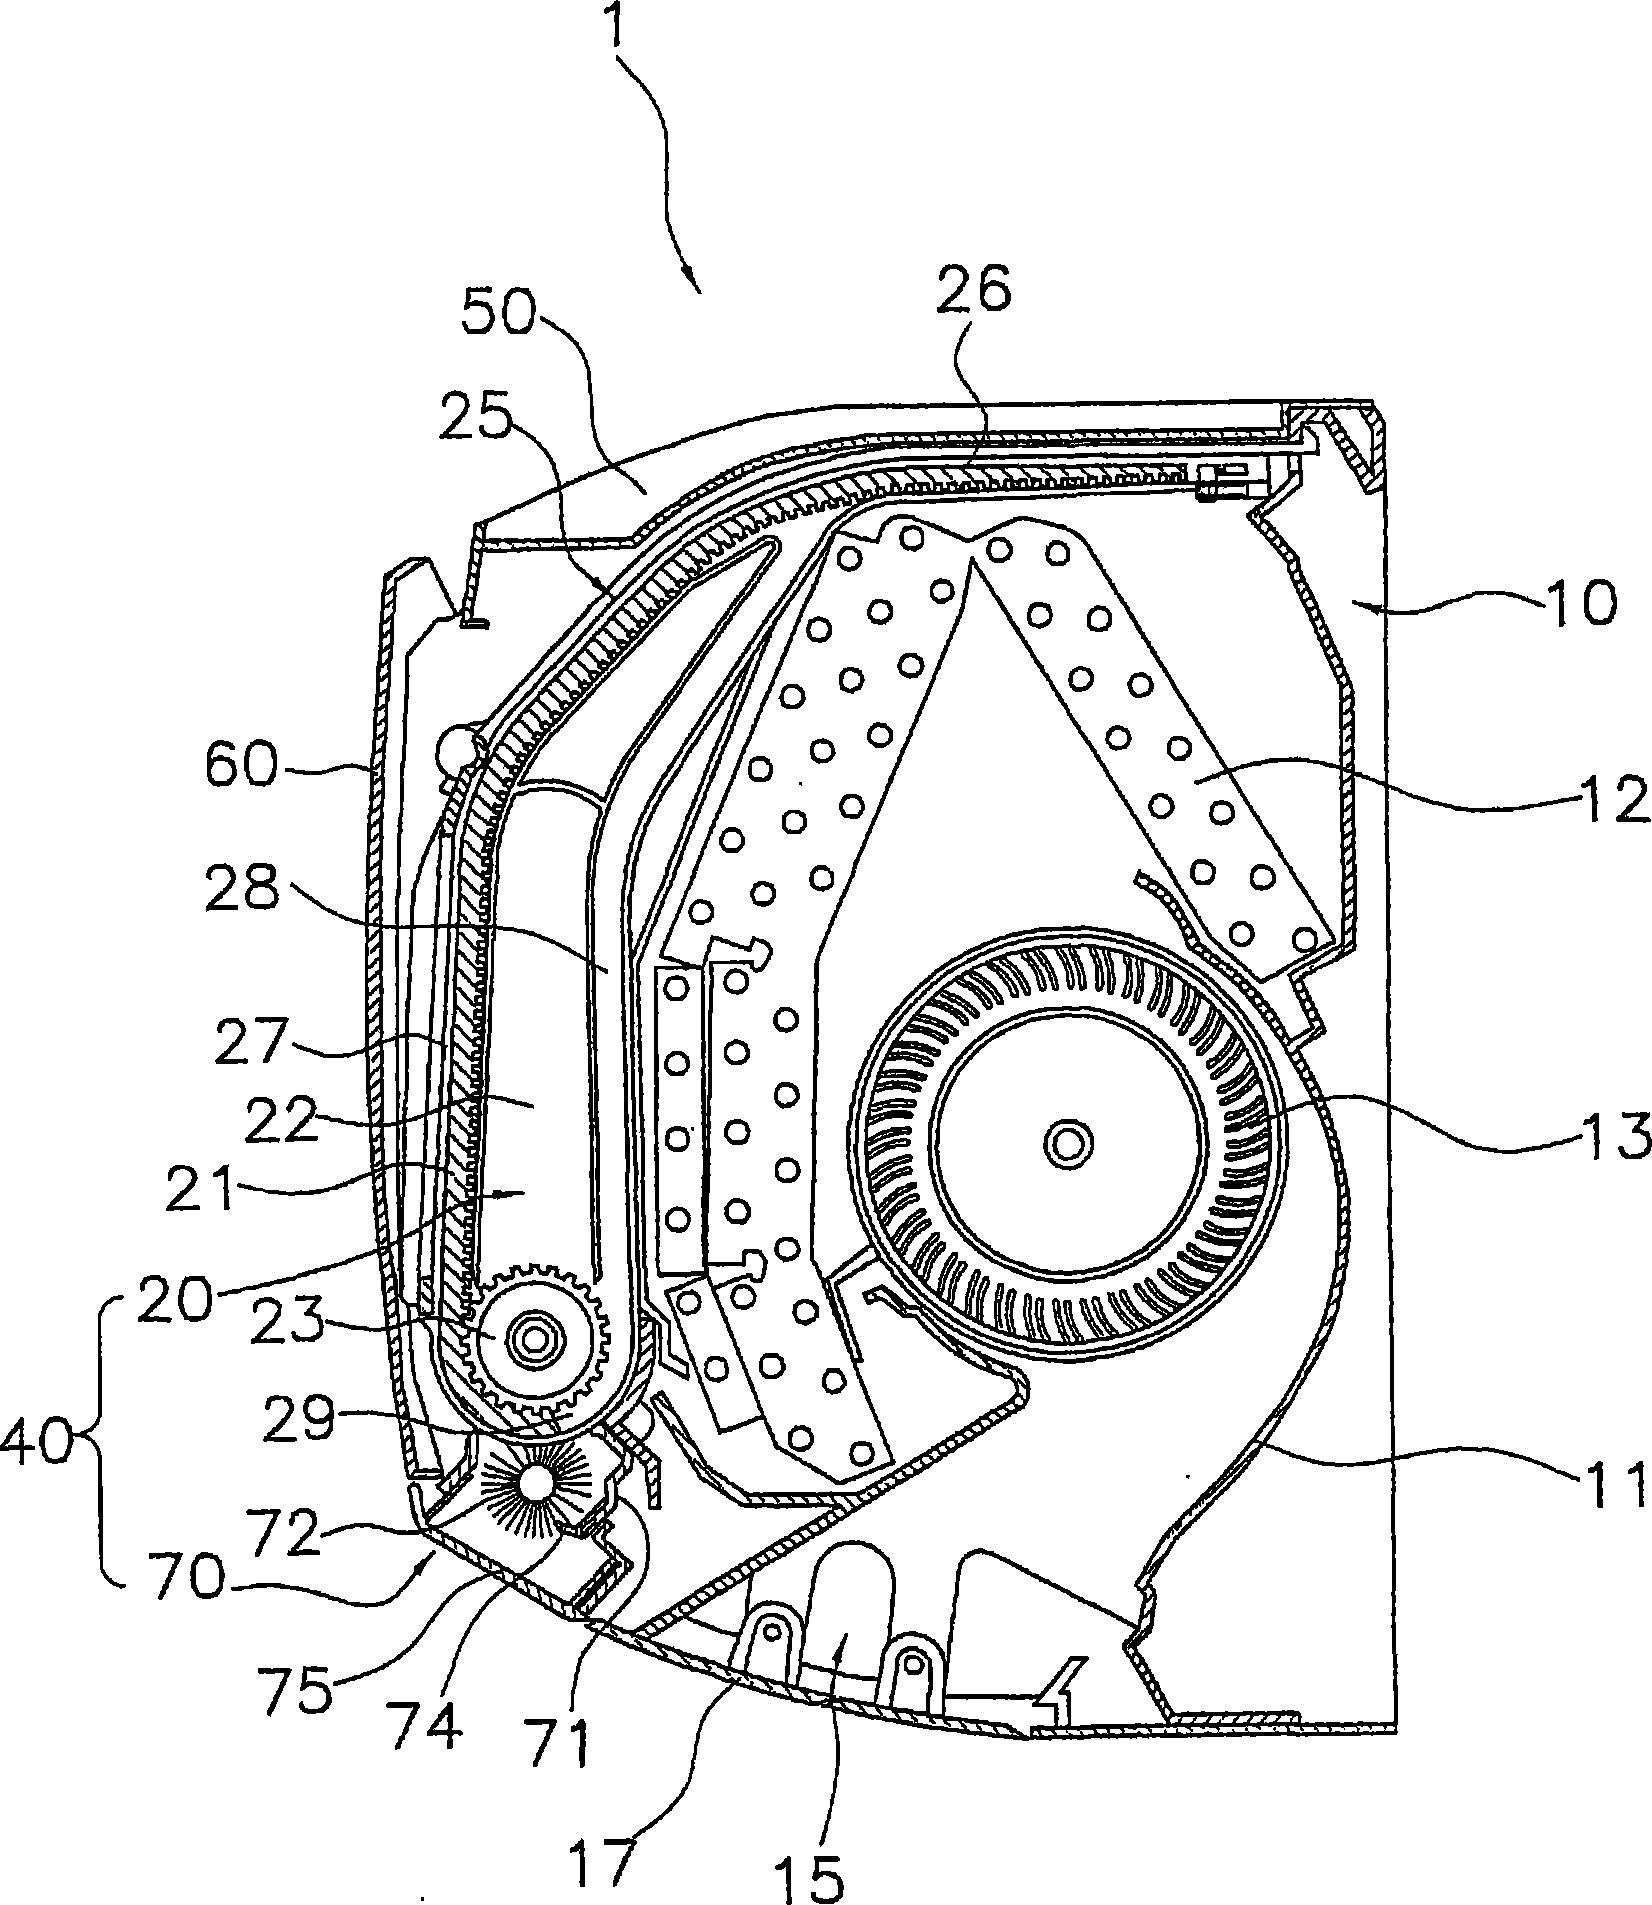 Filter cleaning mechanism for air conditioning apparatus